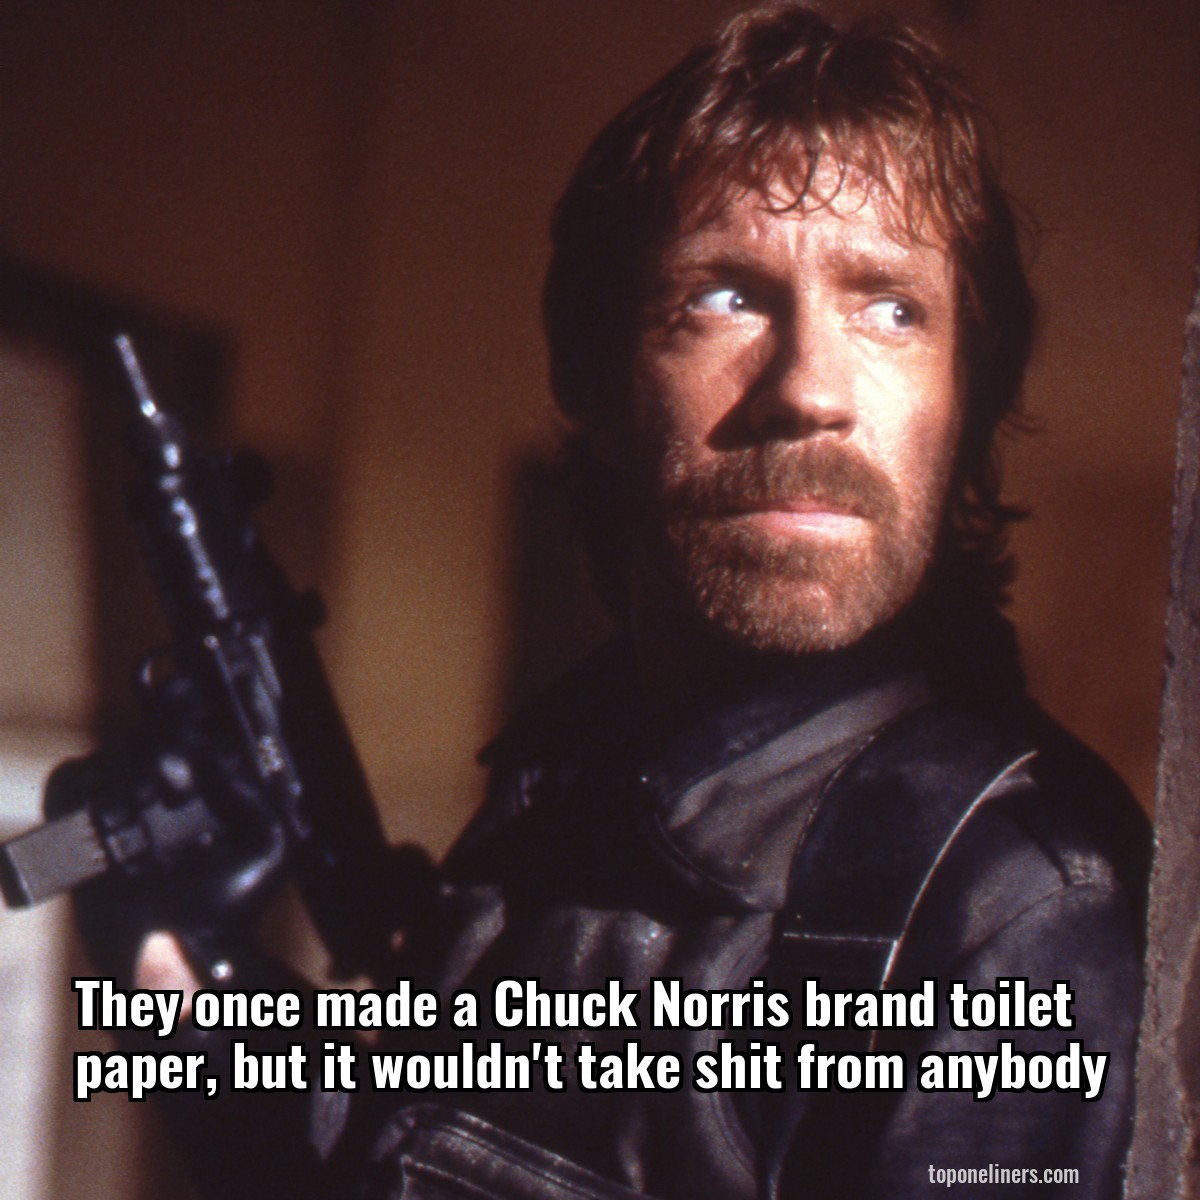 They once made a Chuck Norris brand toilet paper, but it wouldn't take shit from anybody